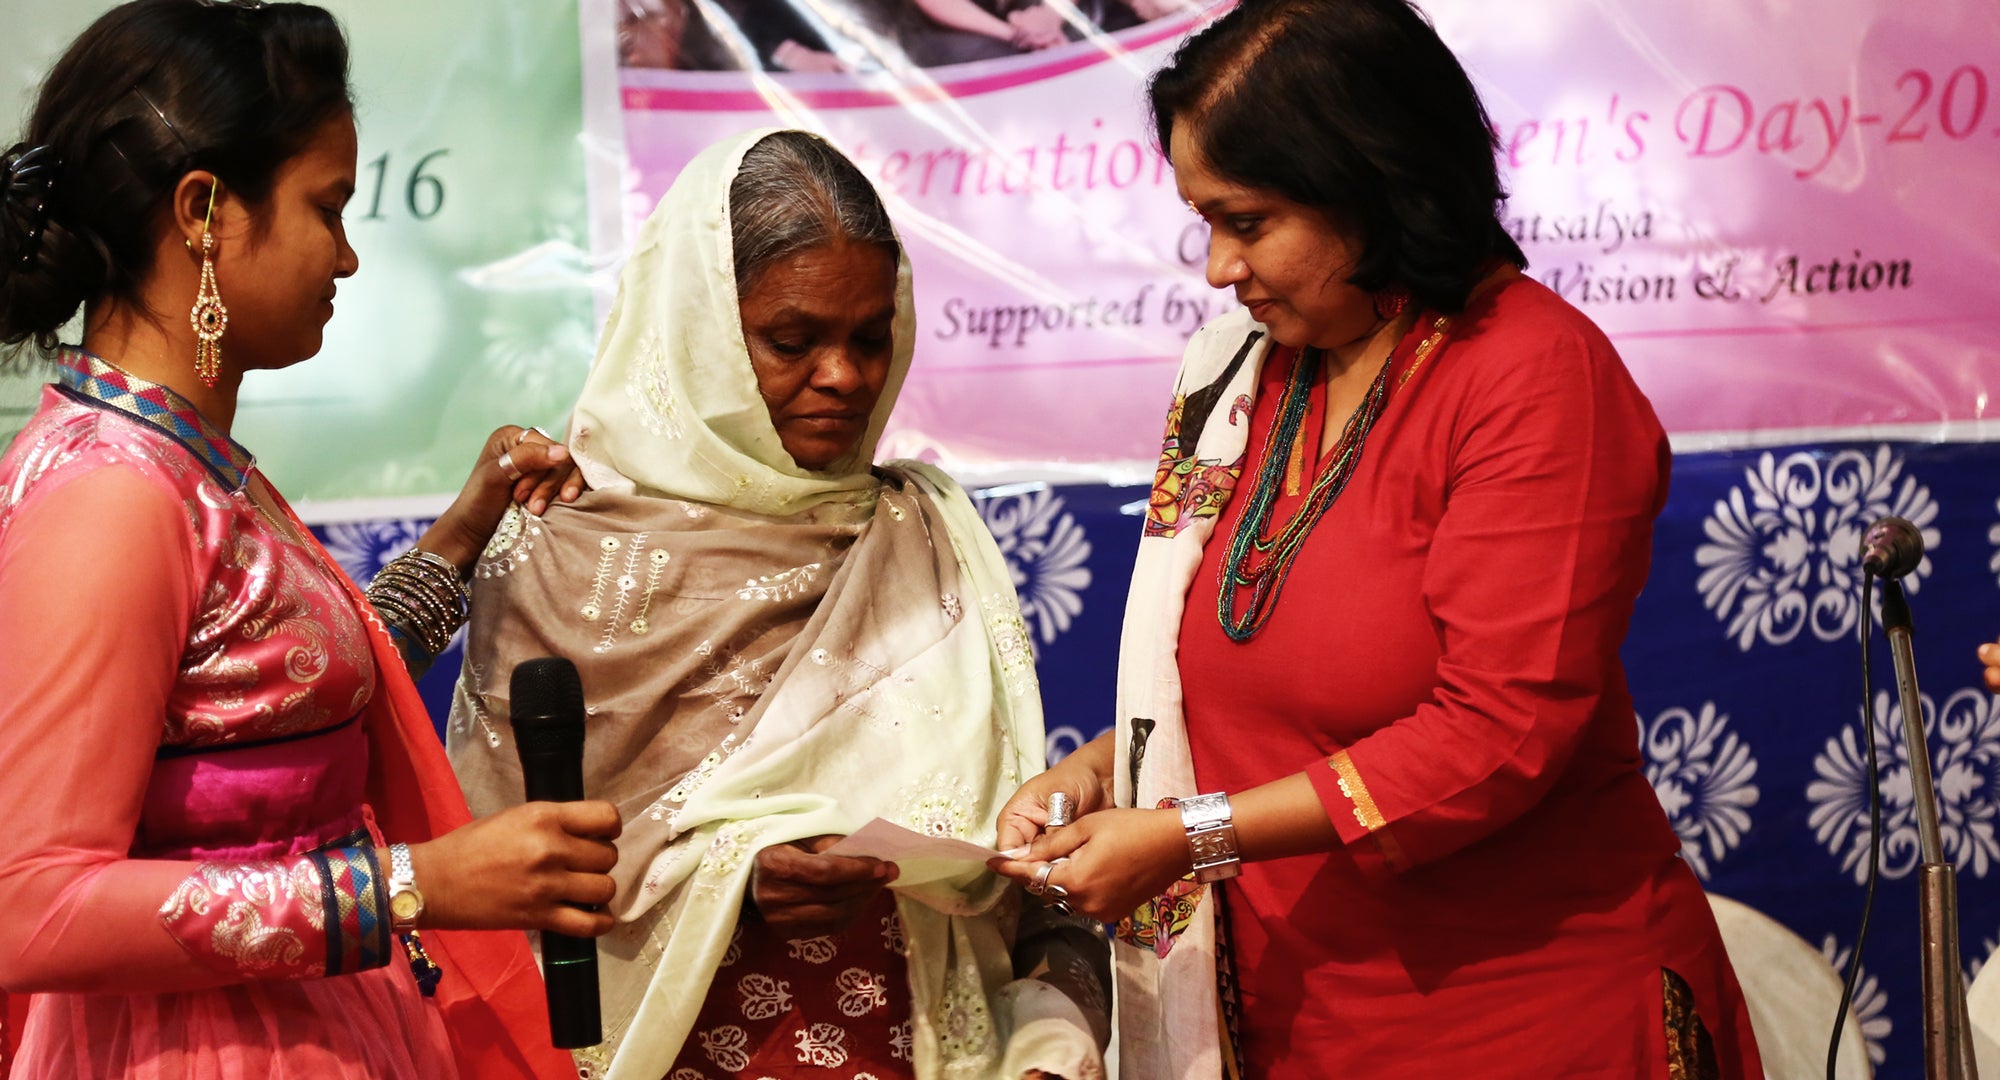 Nazia and mother accepting International Women's Day award